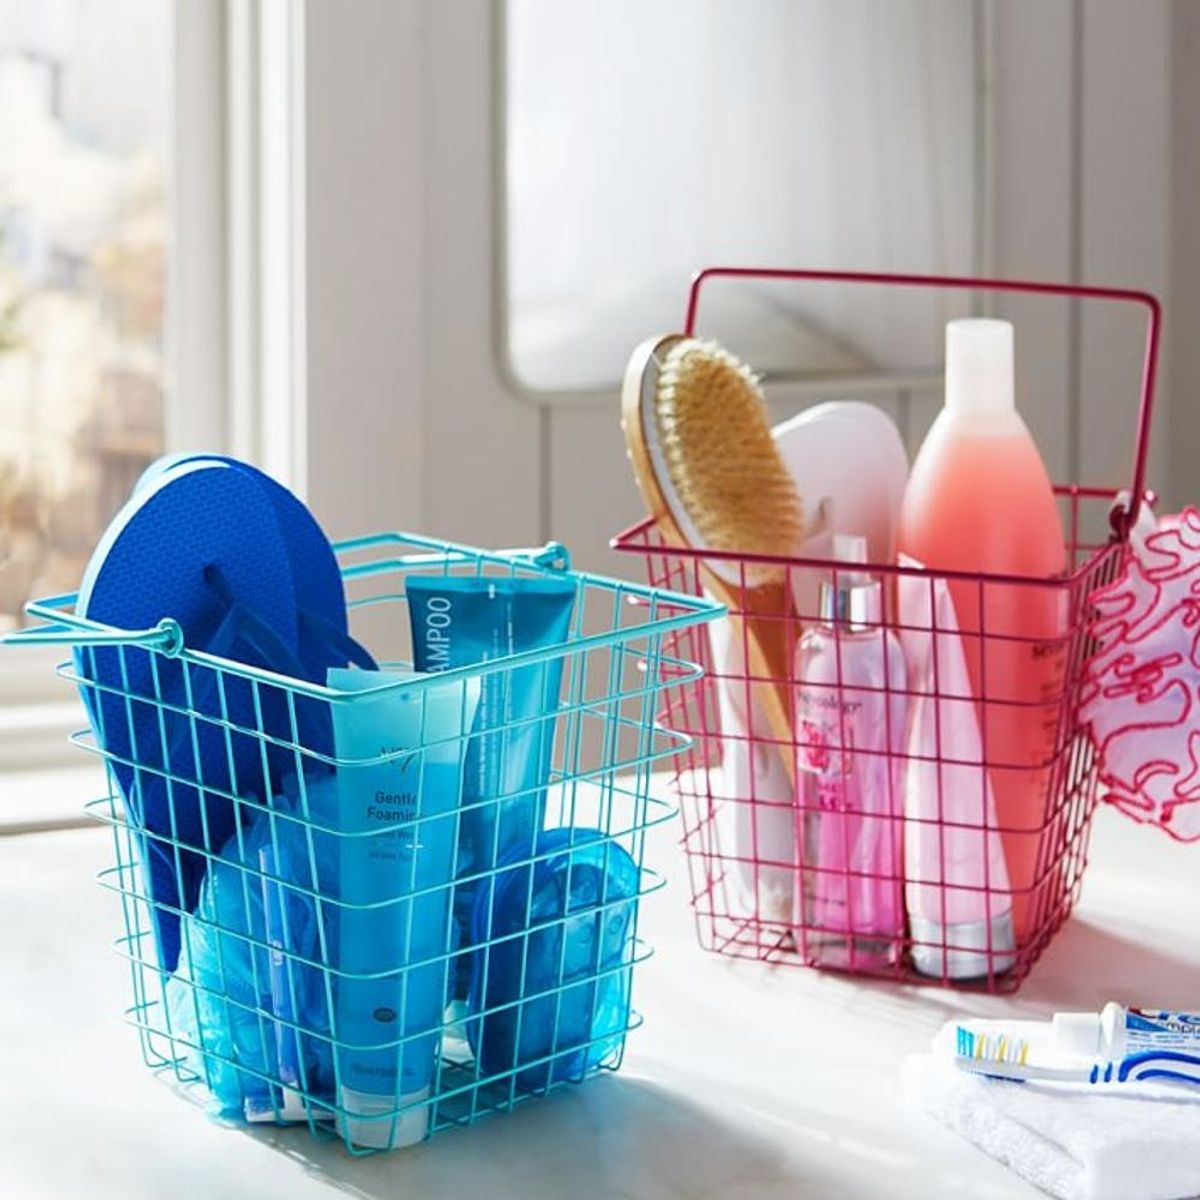 How to Survive Sharing a Shower With These Shower Caddy Hacks